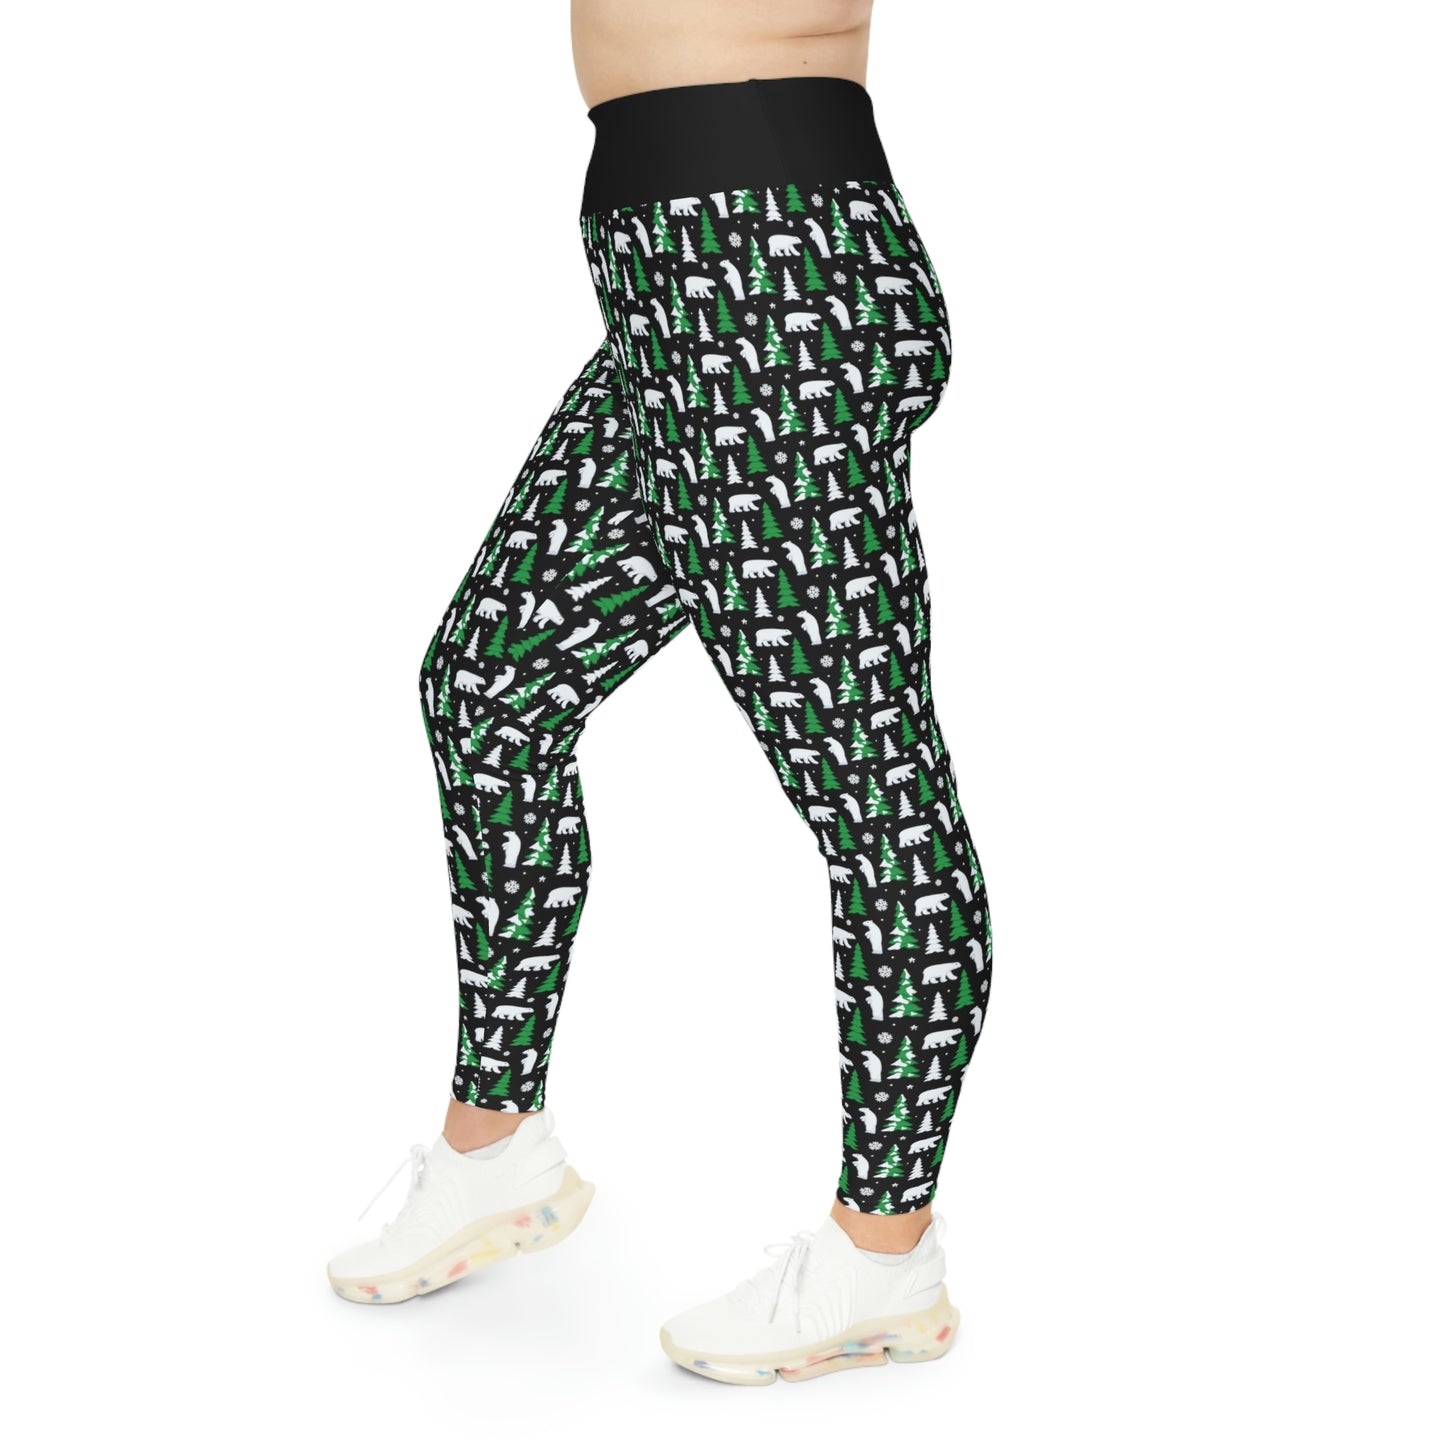 Bear Christmas Plus Size Leggings One of a Kind Gift - Unique Workout Activewear tights for Mom fitness, Mothers Day, Girlfriend Christmas Gift